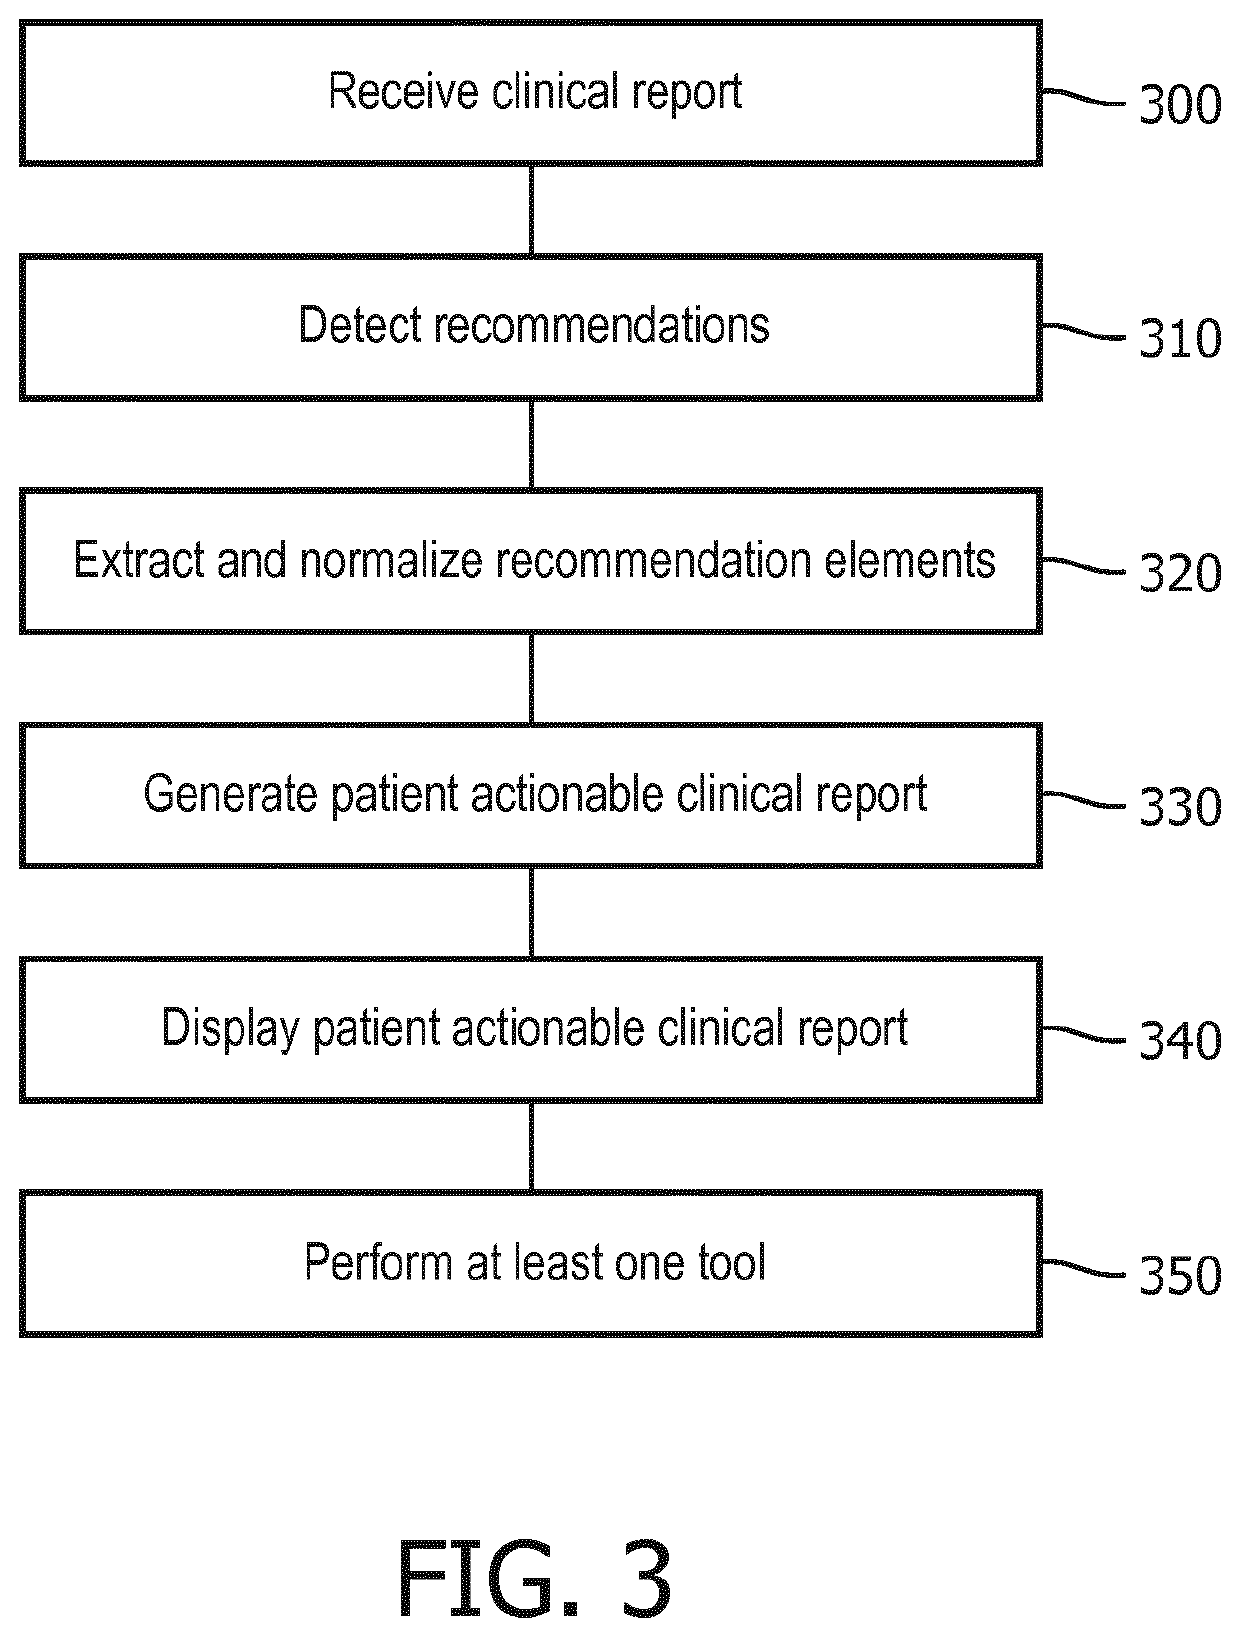 Clinical report with an actionable recommendation